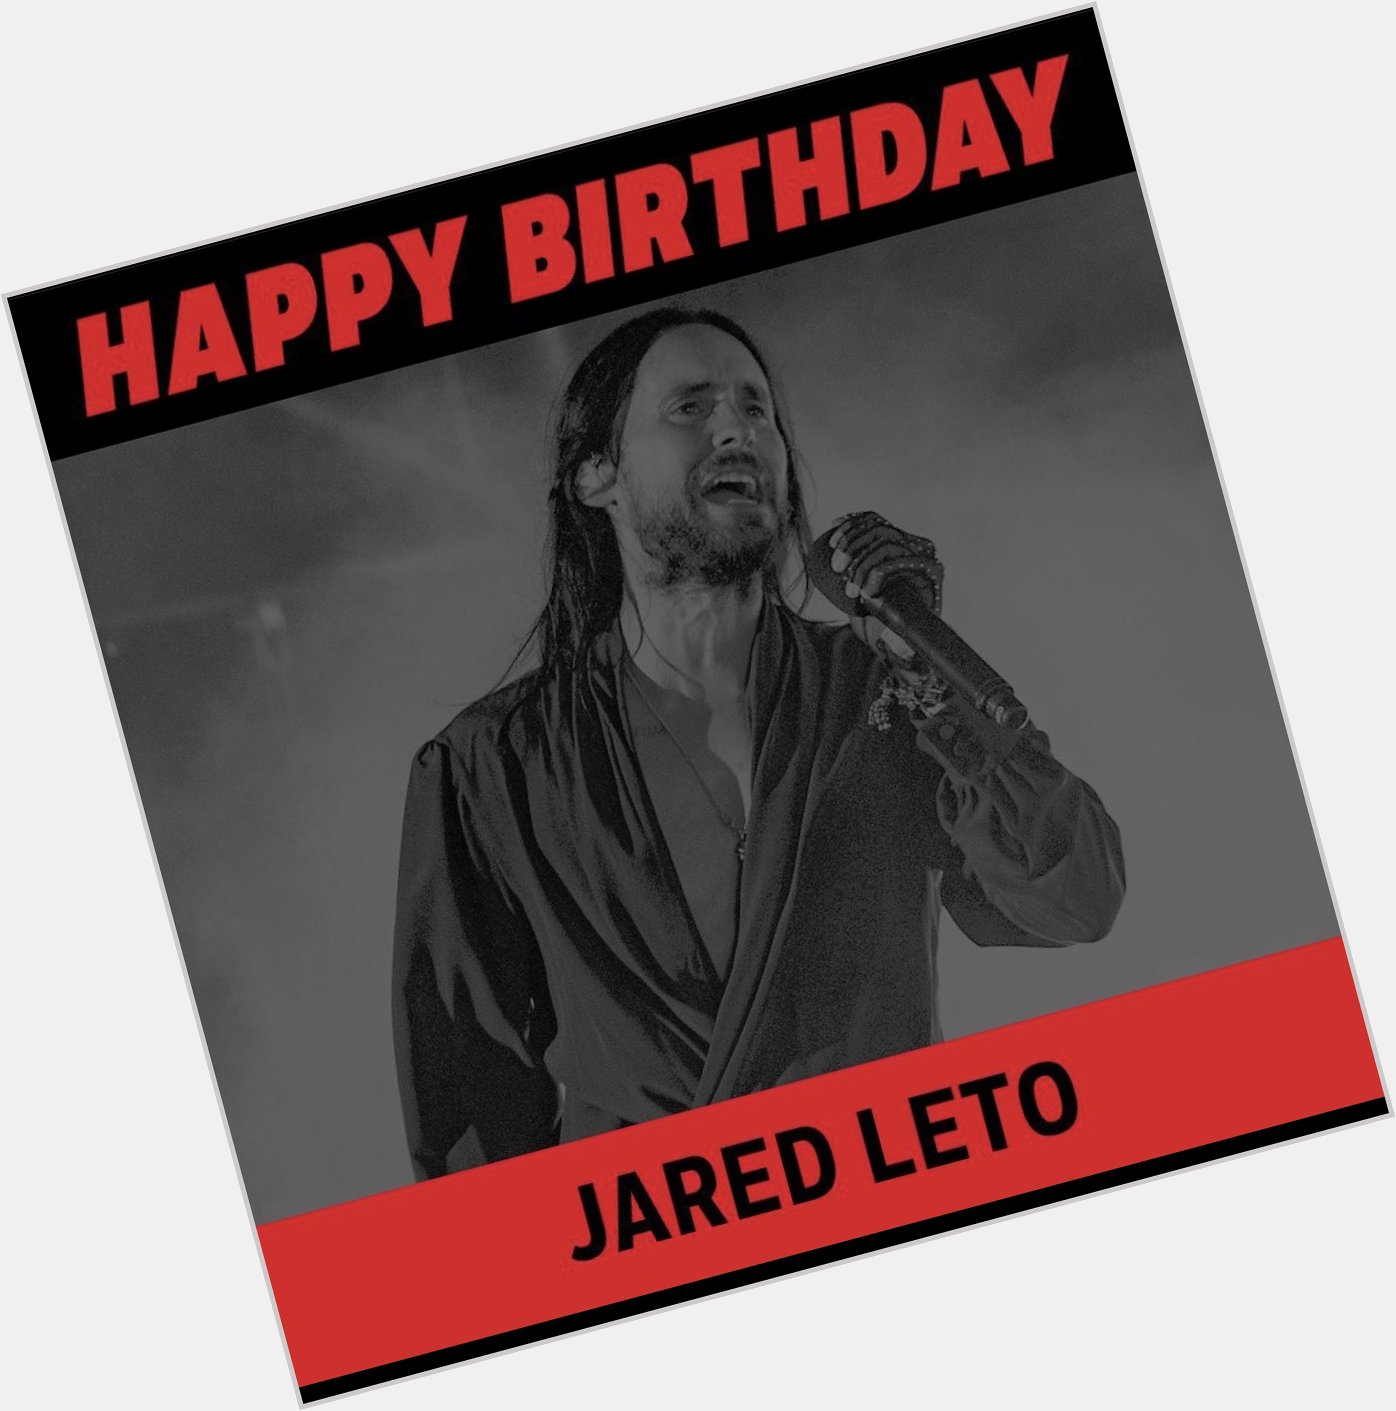 Happy Birthday Jared Leto .. Makes sense he was born some days after Jesus  